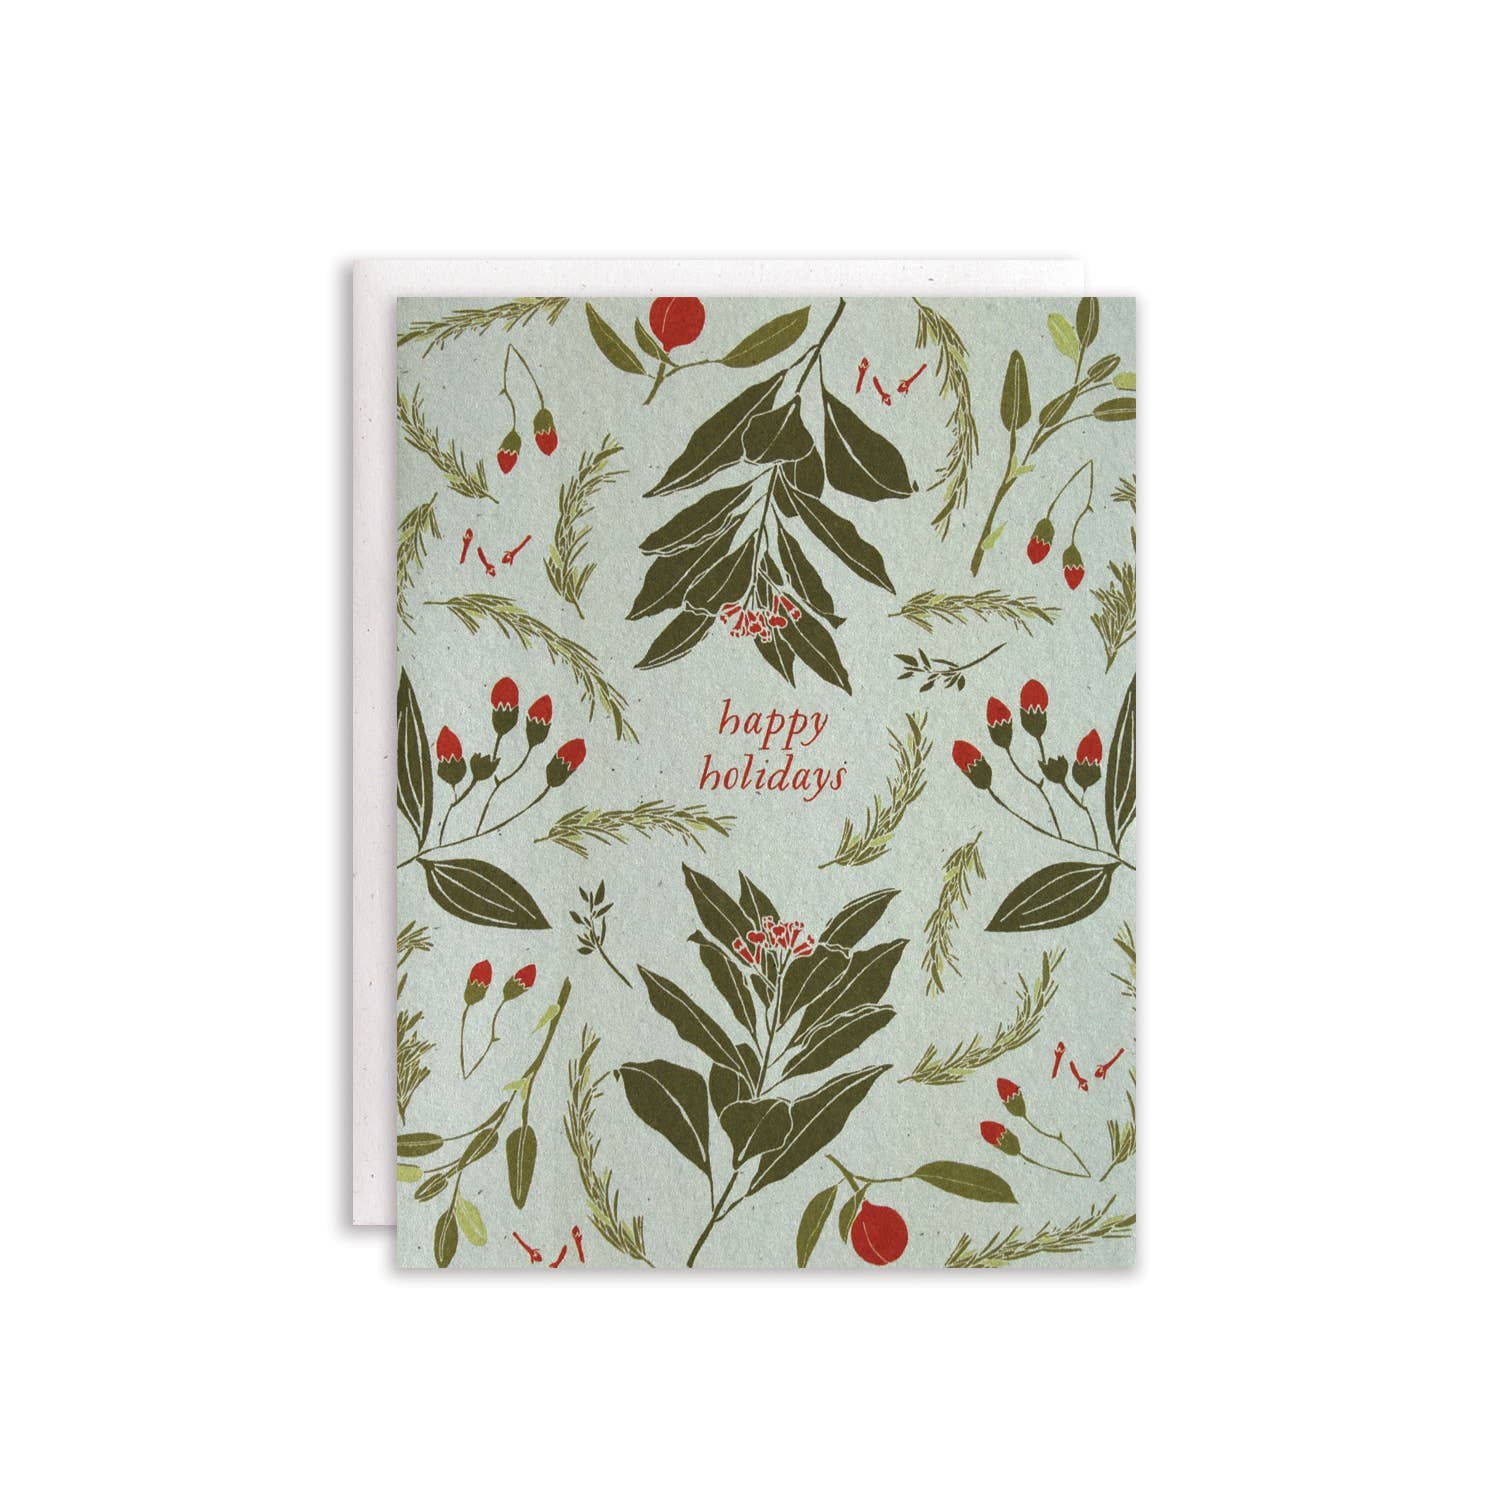 Festive Flavors Boxed Cards / Boxed set of 8